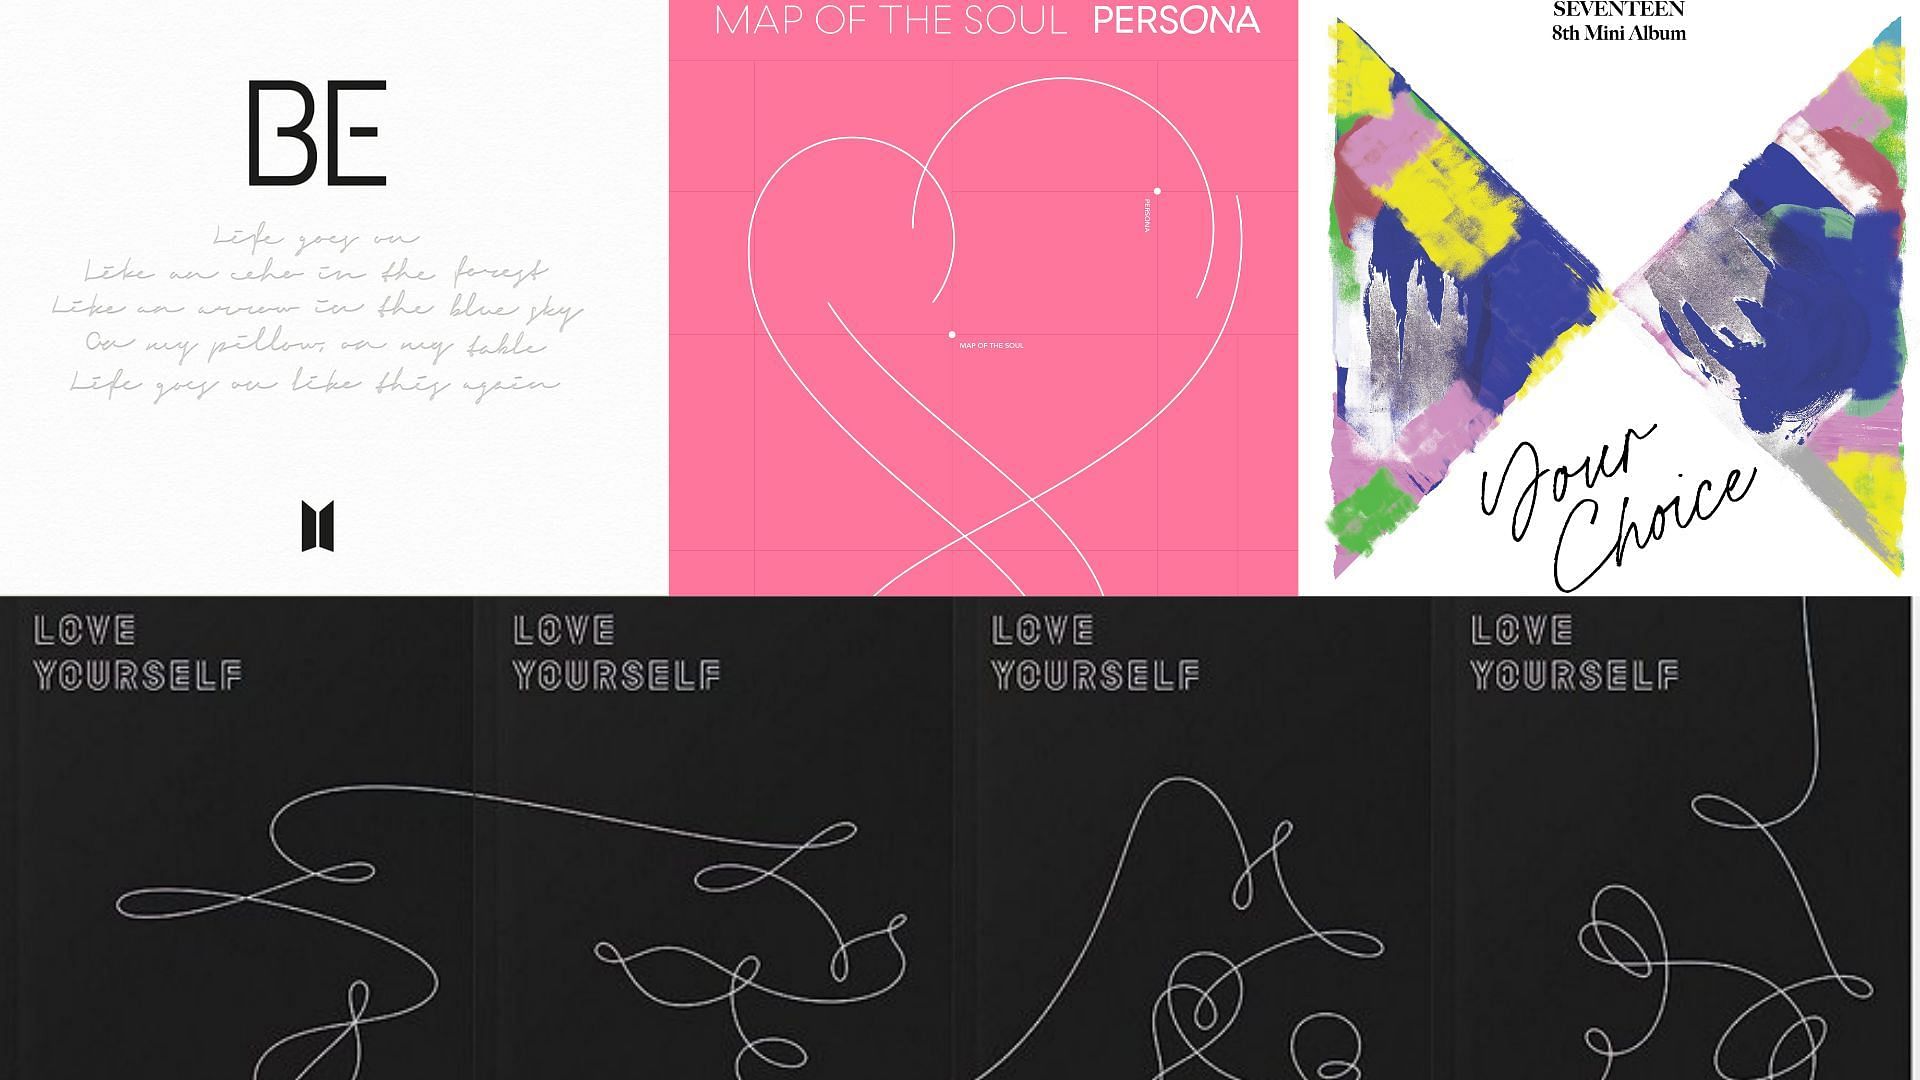 BE, Map of the Soul: Persona, Your Choice, and Love Yourself:Tear album covers (Images via @BIGHIT_MUSIC/Twitter and pledis_17/Twitter)